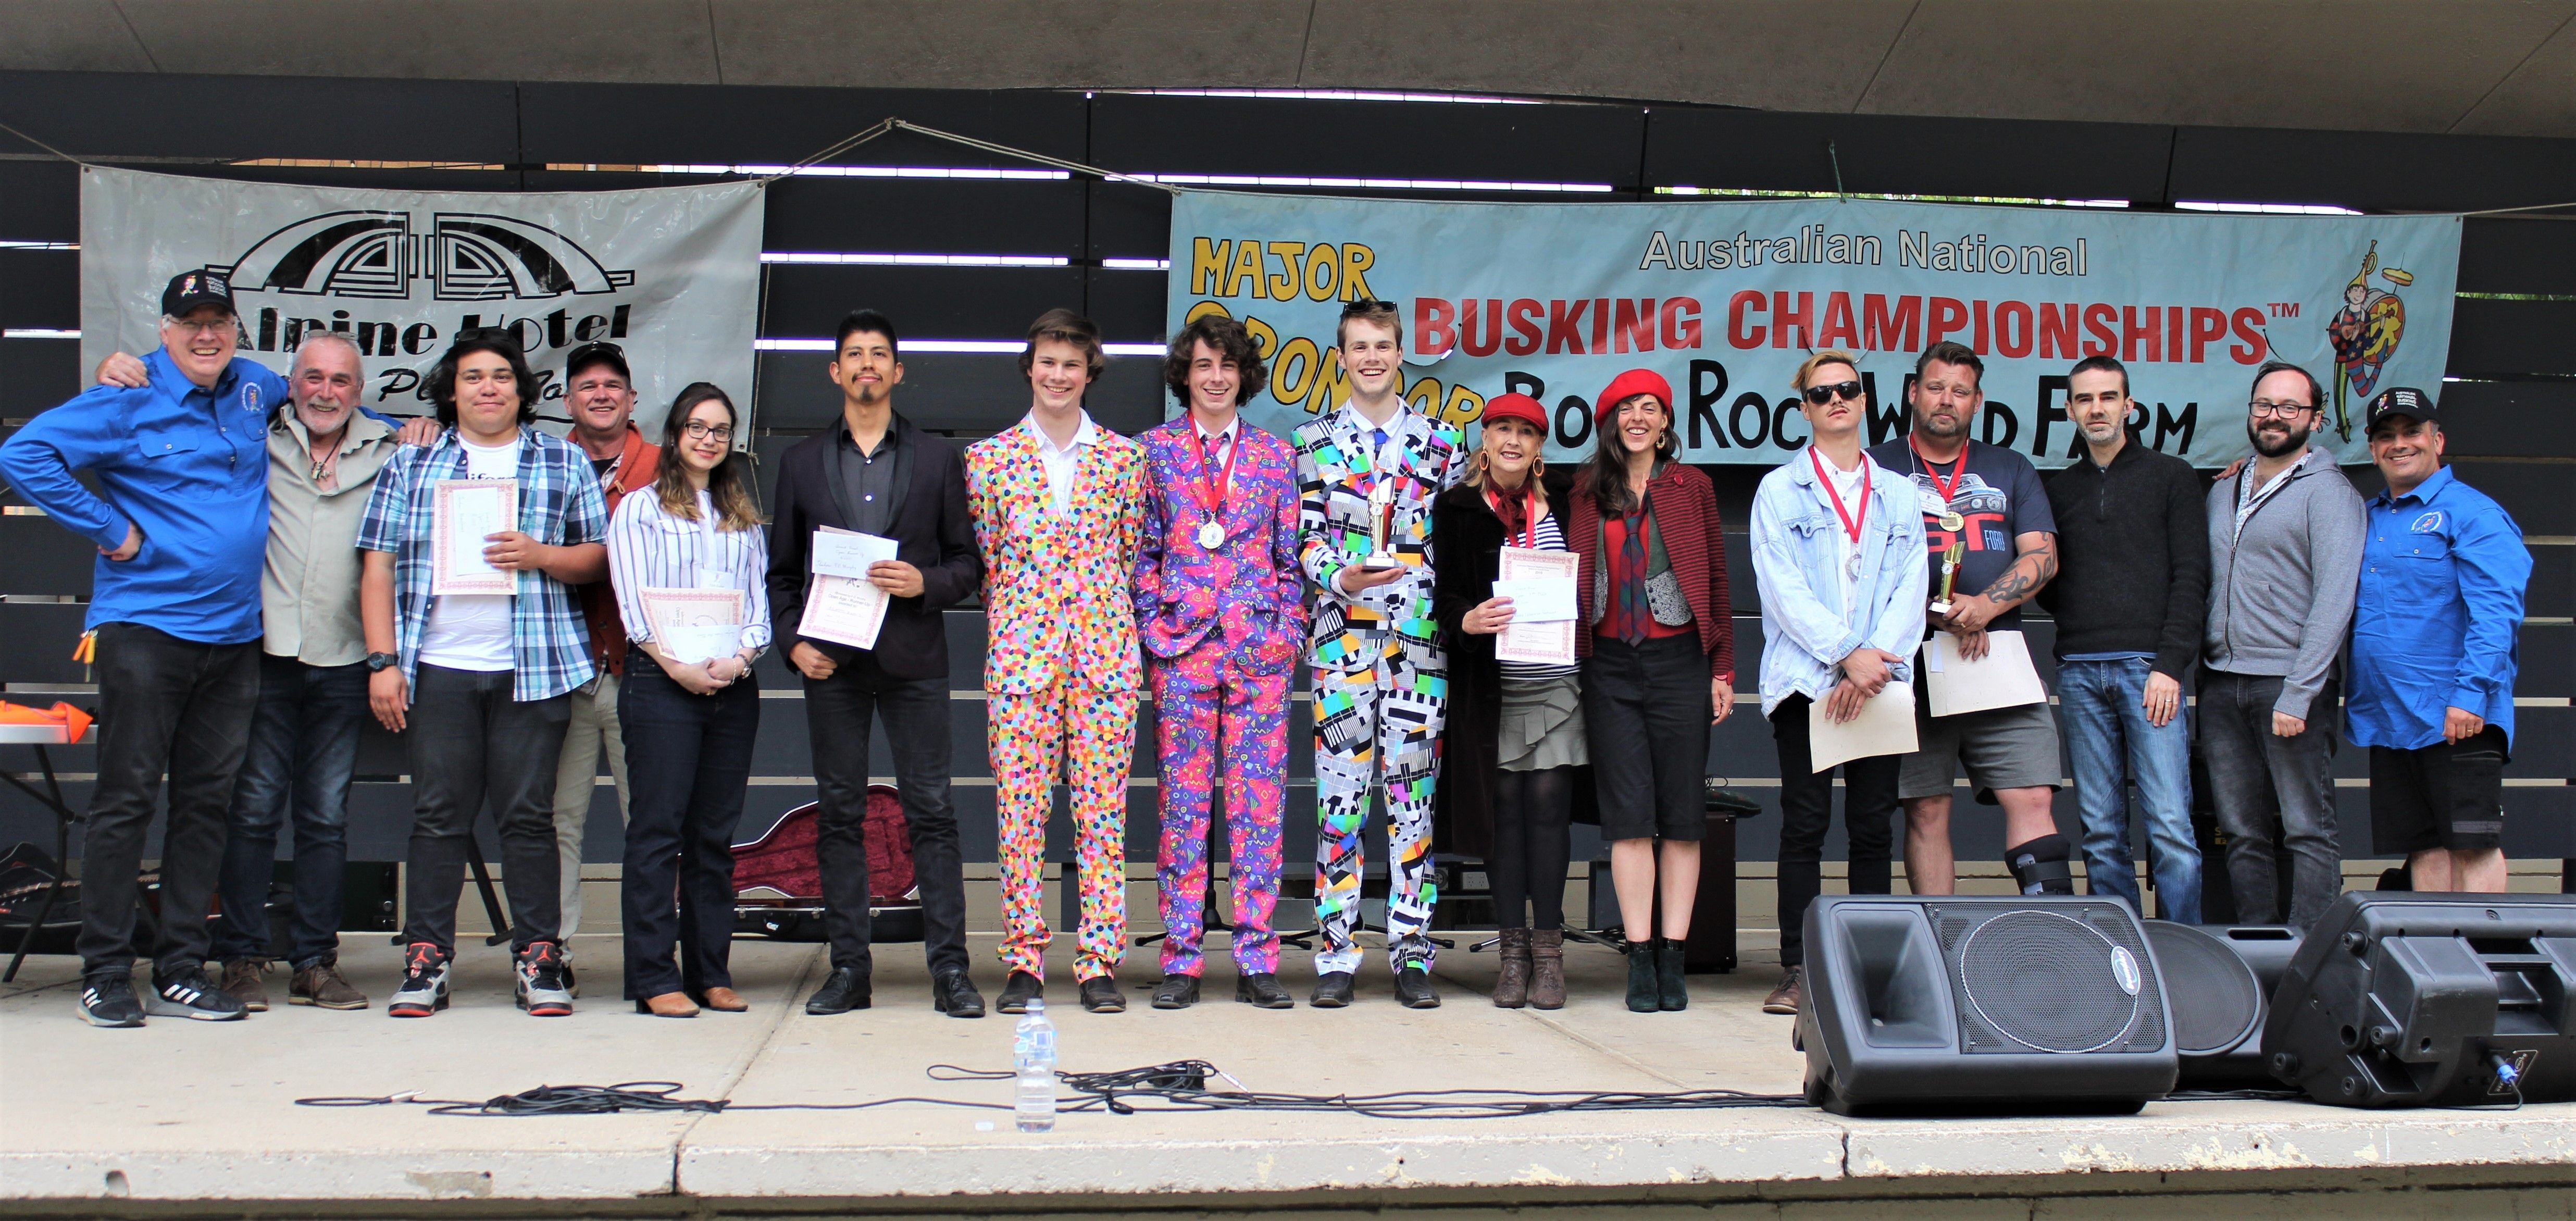 Nothing inadequate about national busking winners